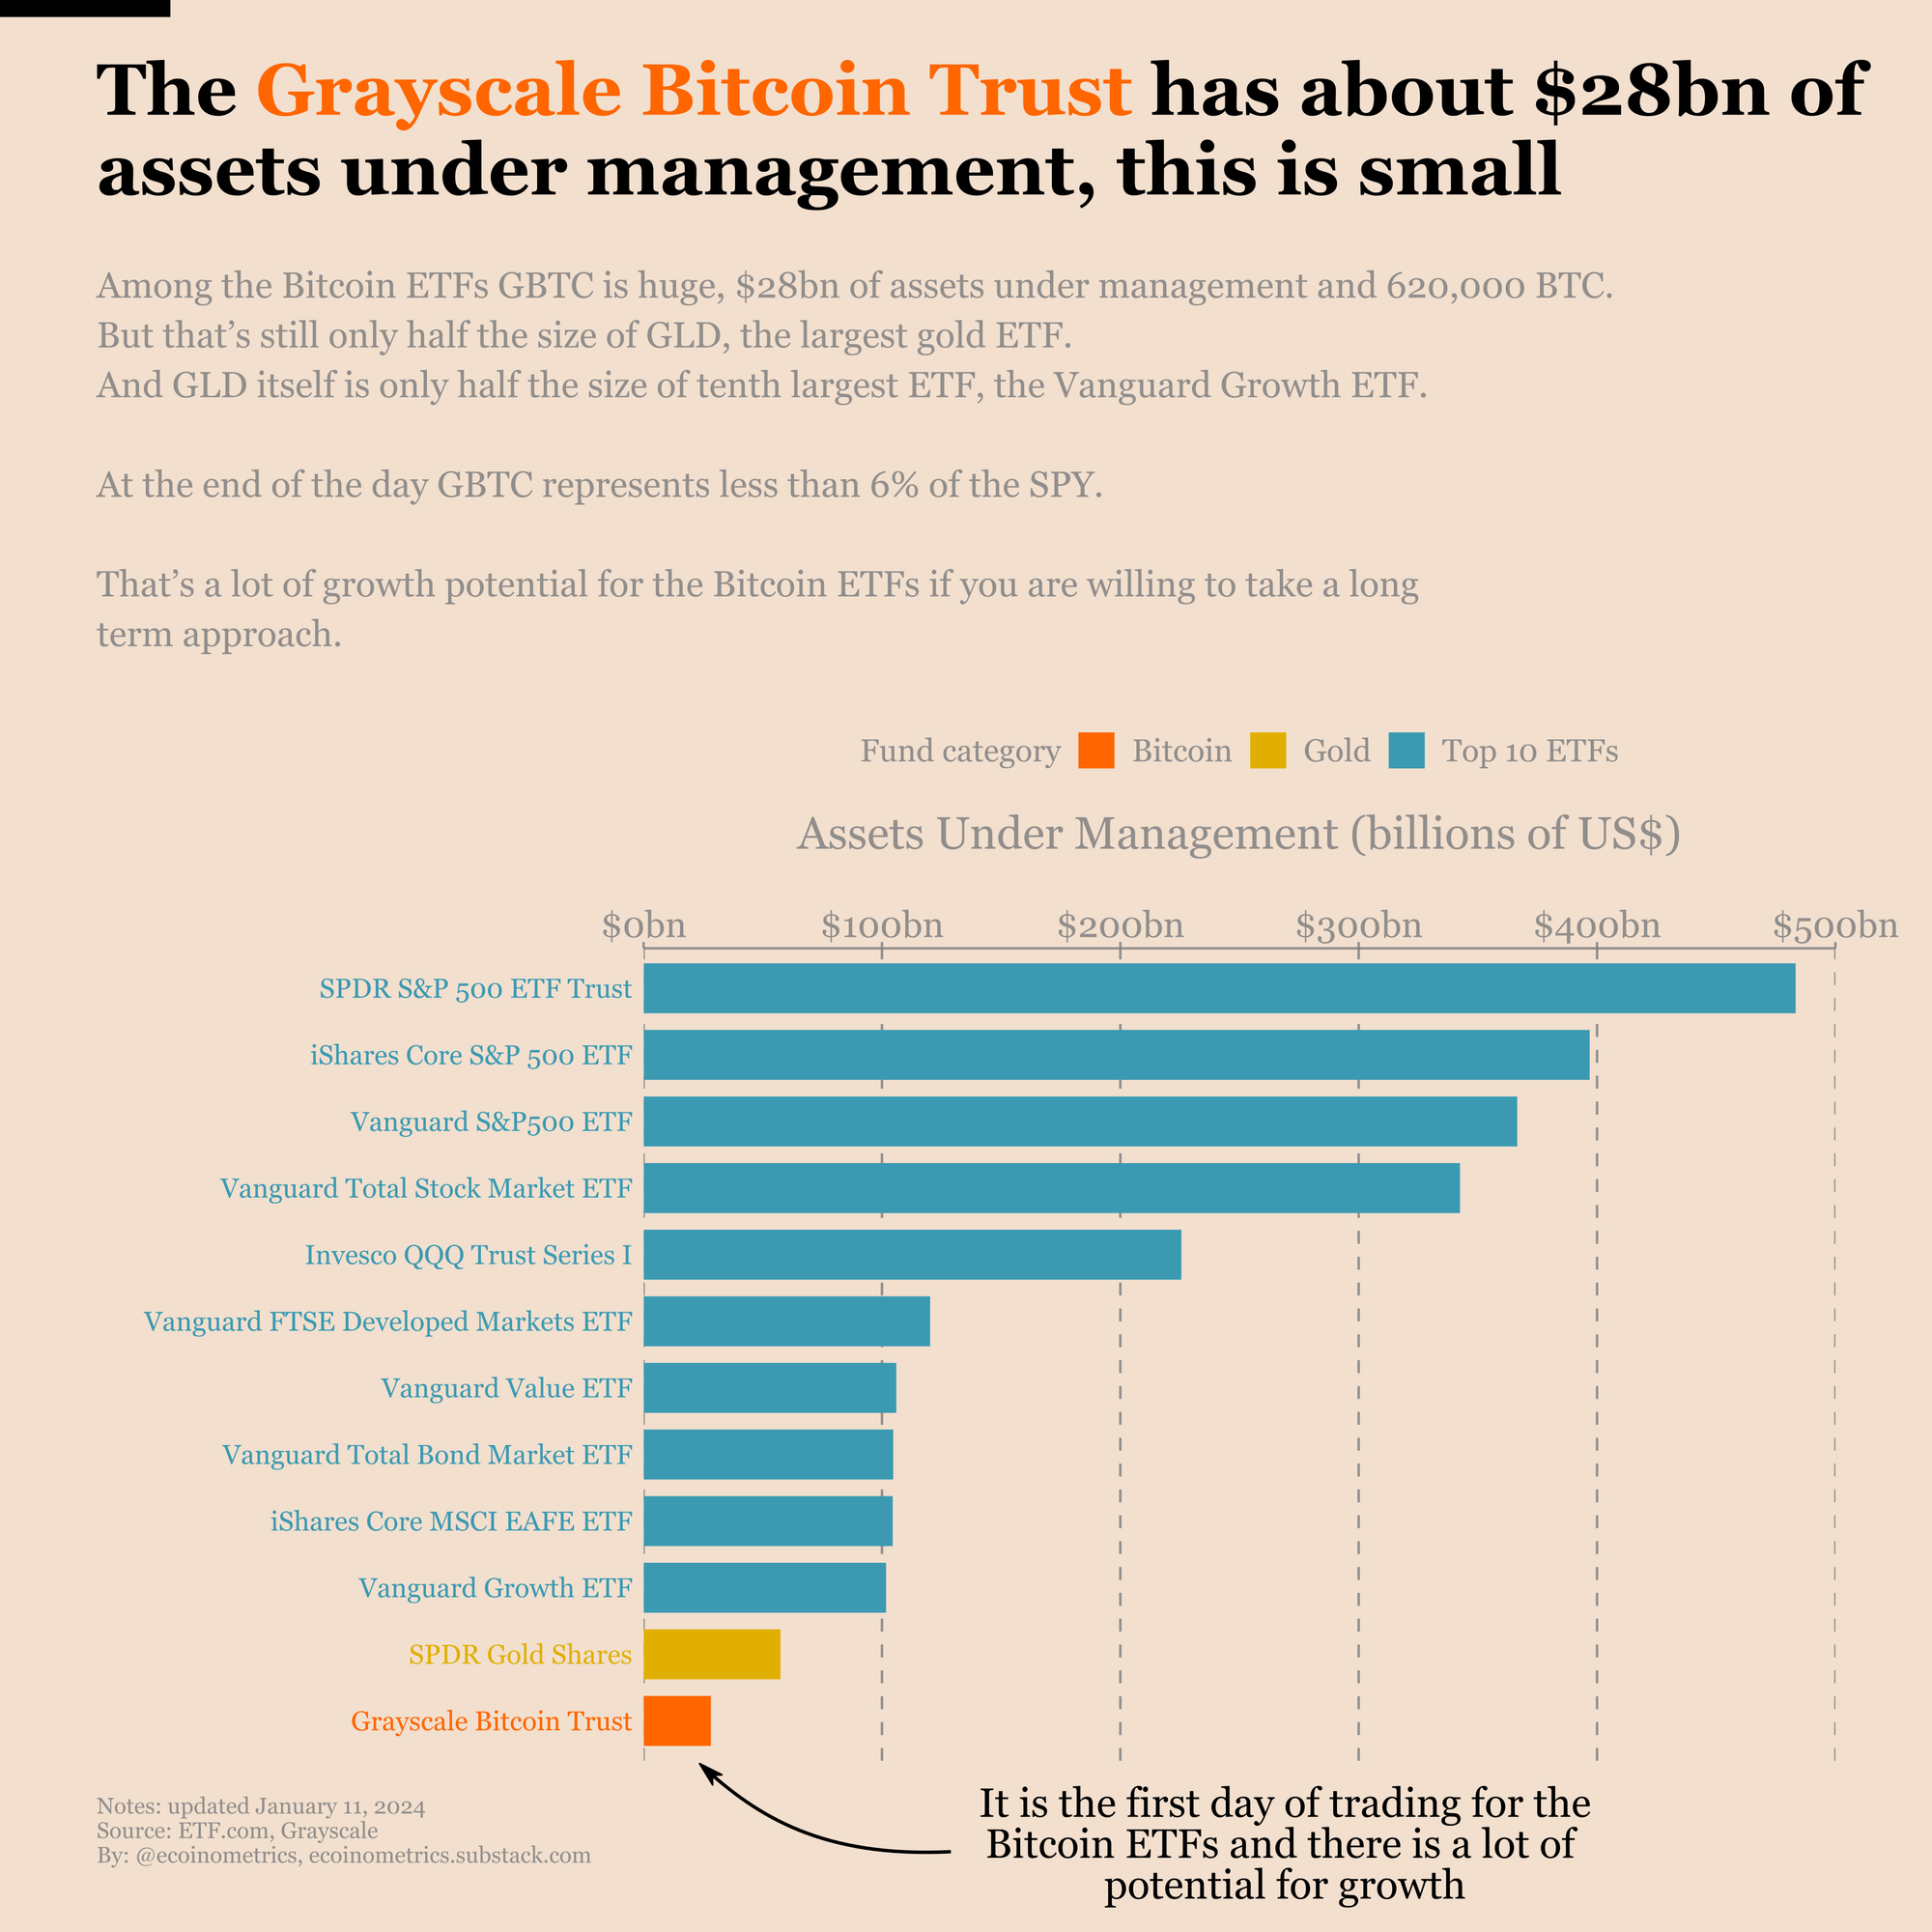 Comparing the size of the Grayscale Bitcoin Trust to some of the largest ETFs in the world.